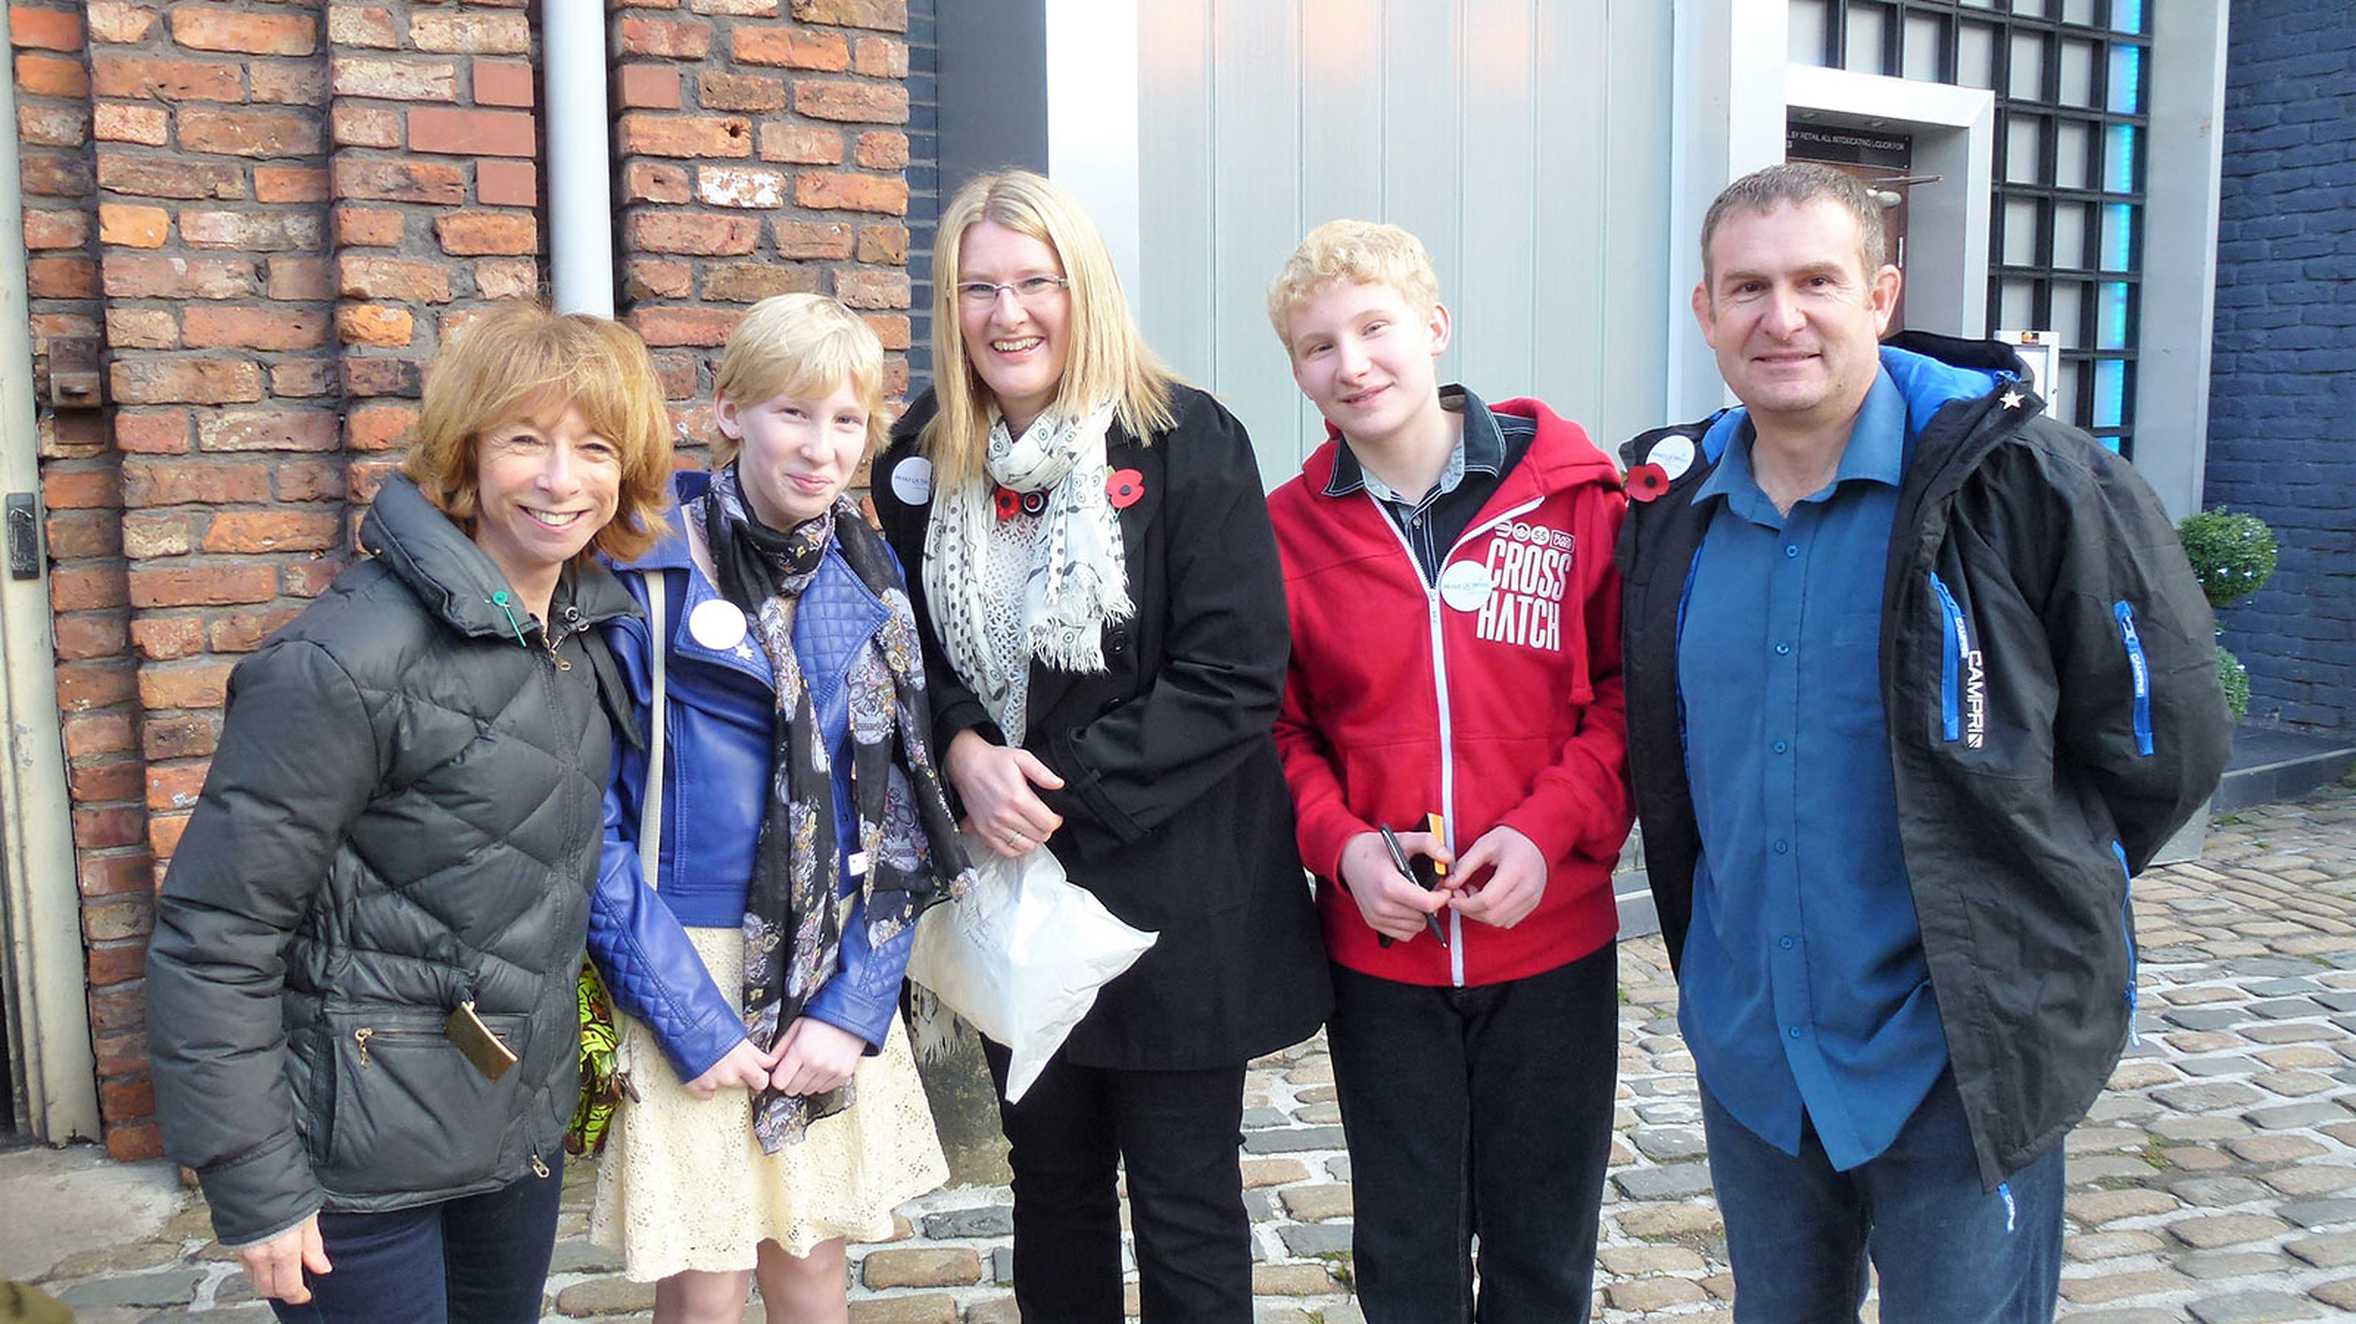 Hannah and her family meeting actress, Helen Worth on the Coronation Street set.